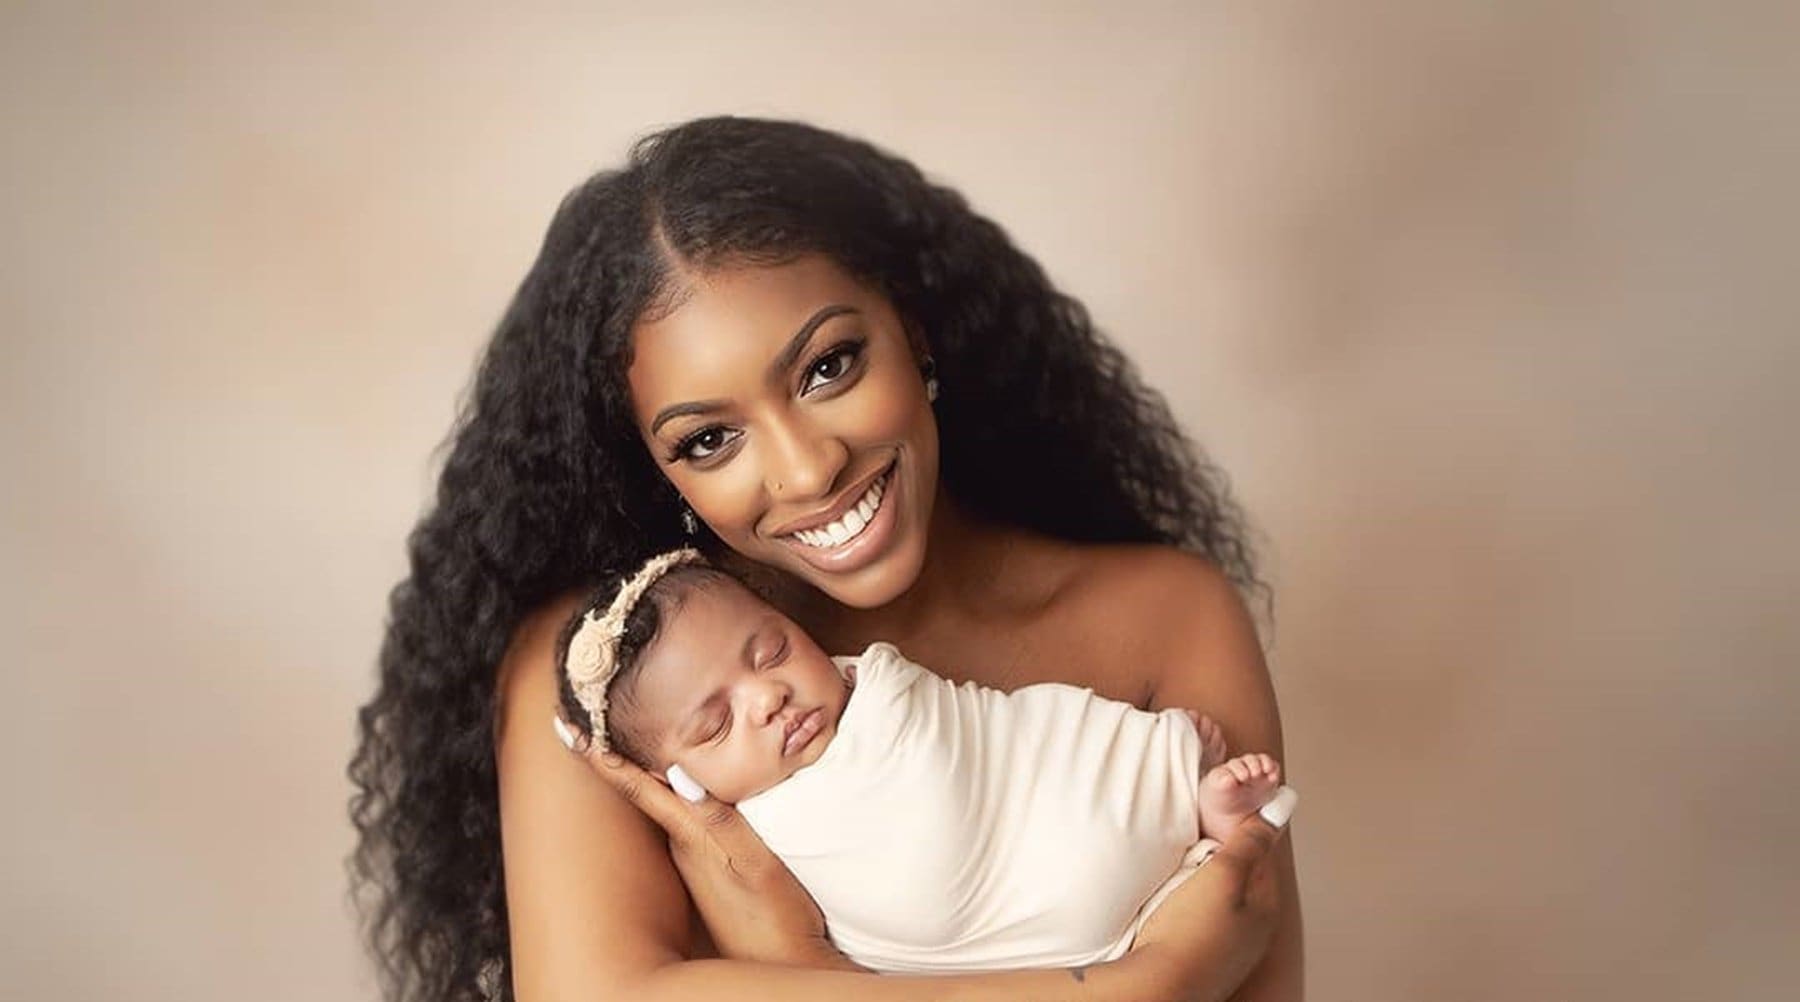 Porsha Williams Shares A New Photo Of Her Daughter - Pilar Jhena's Smile Is Contagious